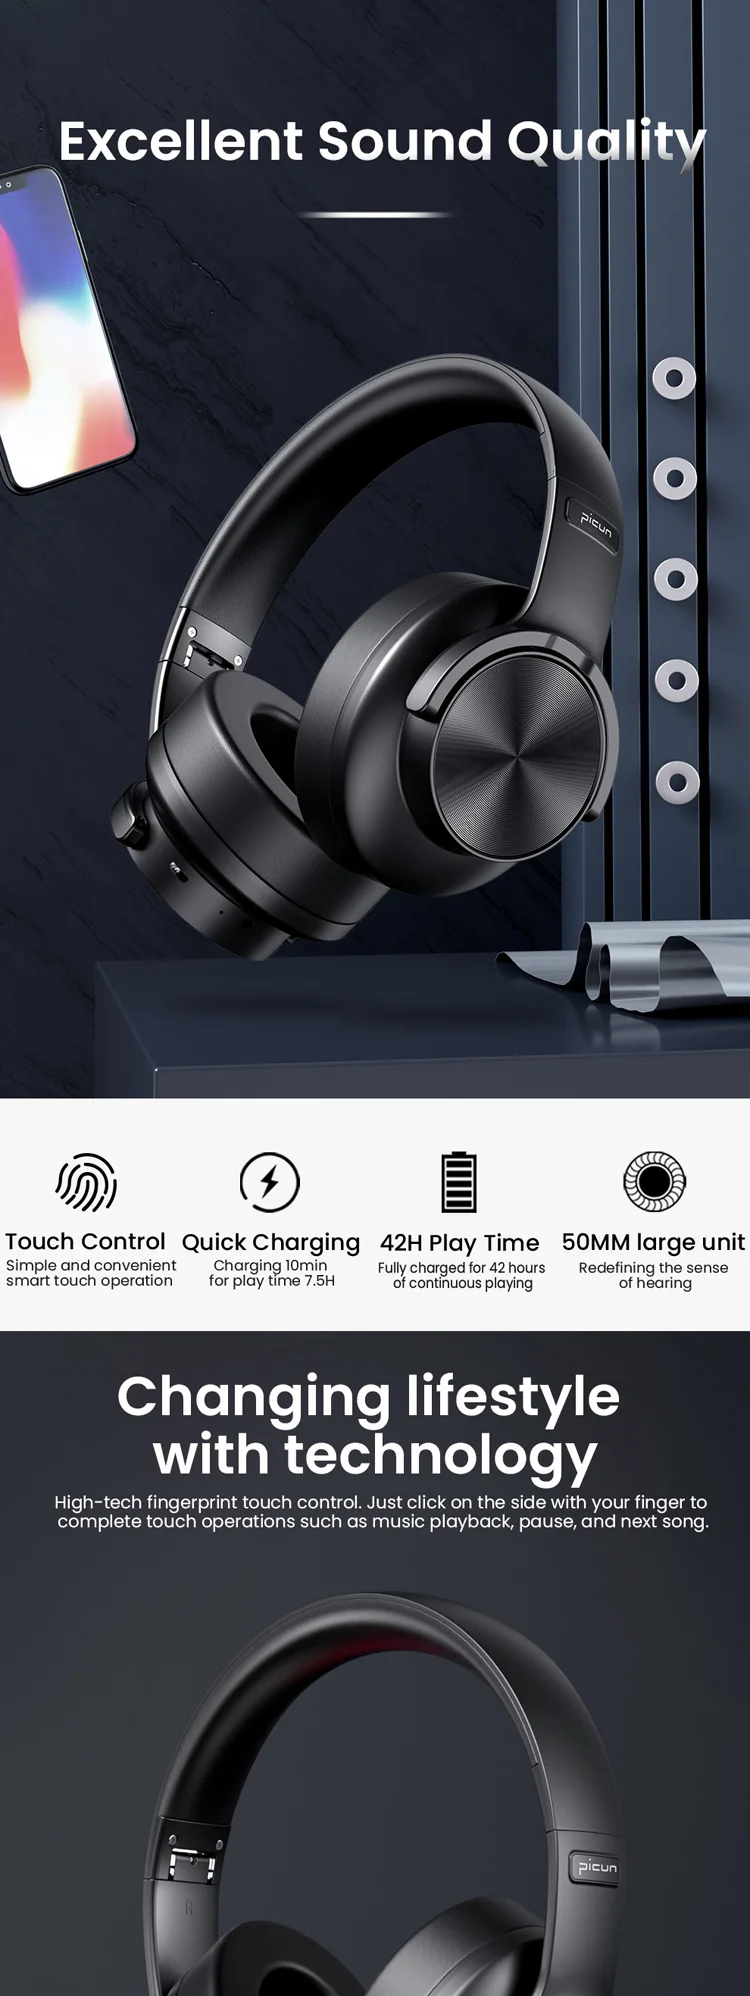 Picun B8 Foldable Bt Mobile Phone Stereo Music Headset Bluetooth Headphones Wireless - Buy Bluetooth Headphones Wireless,Bluetooth Headphone,Wireless Bluetooth Headphone Product Alibaba.com